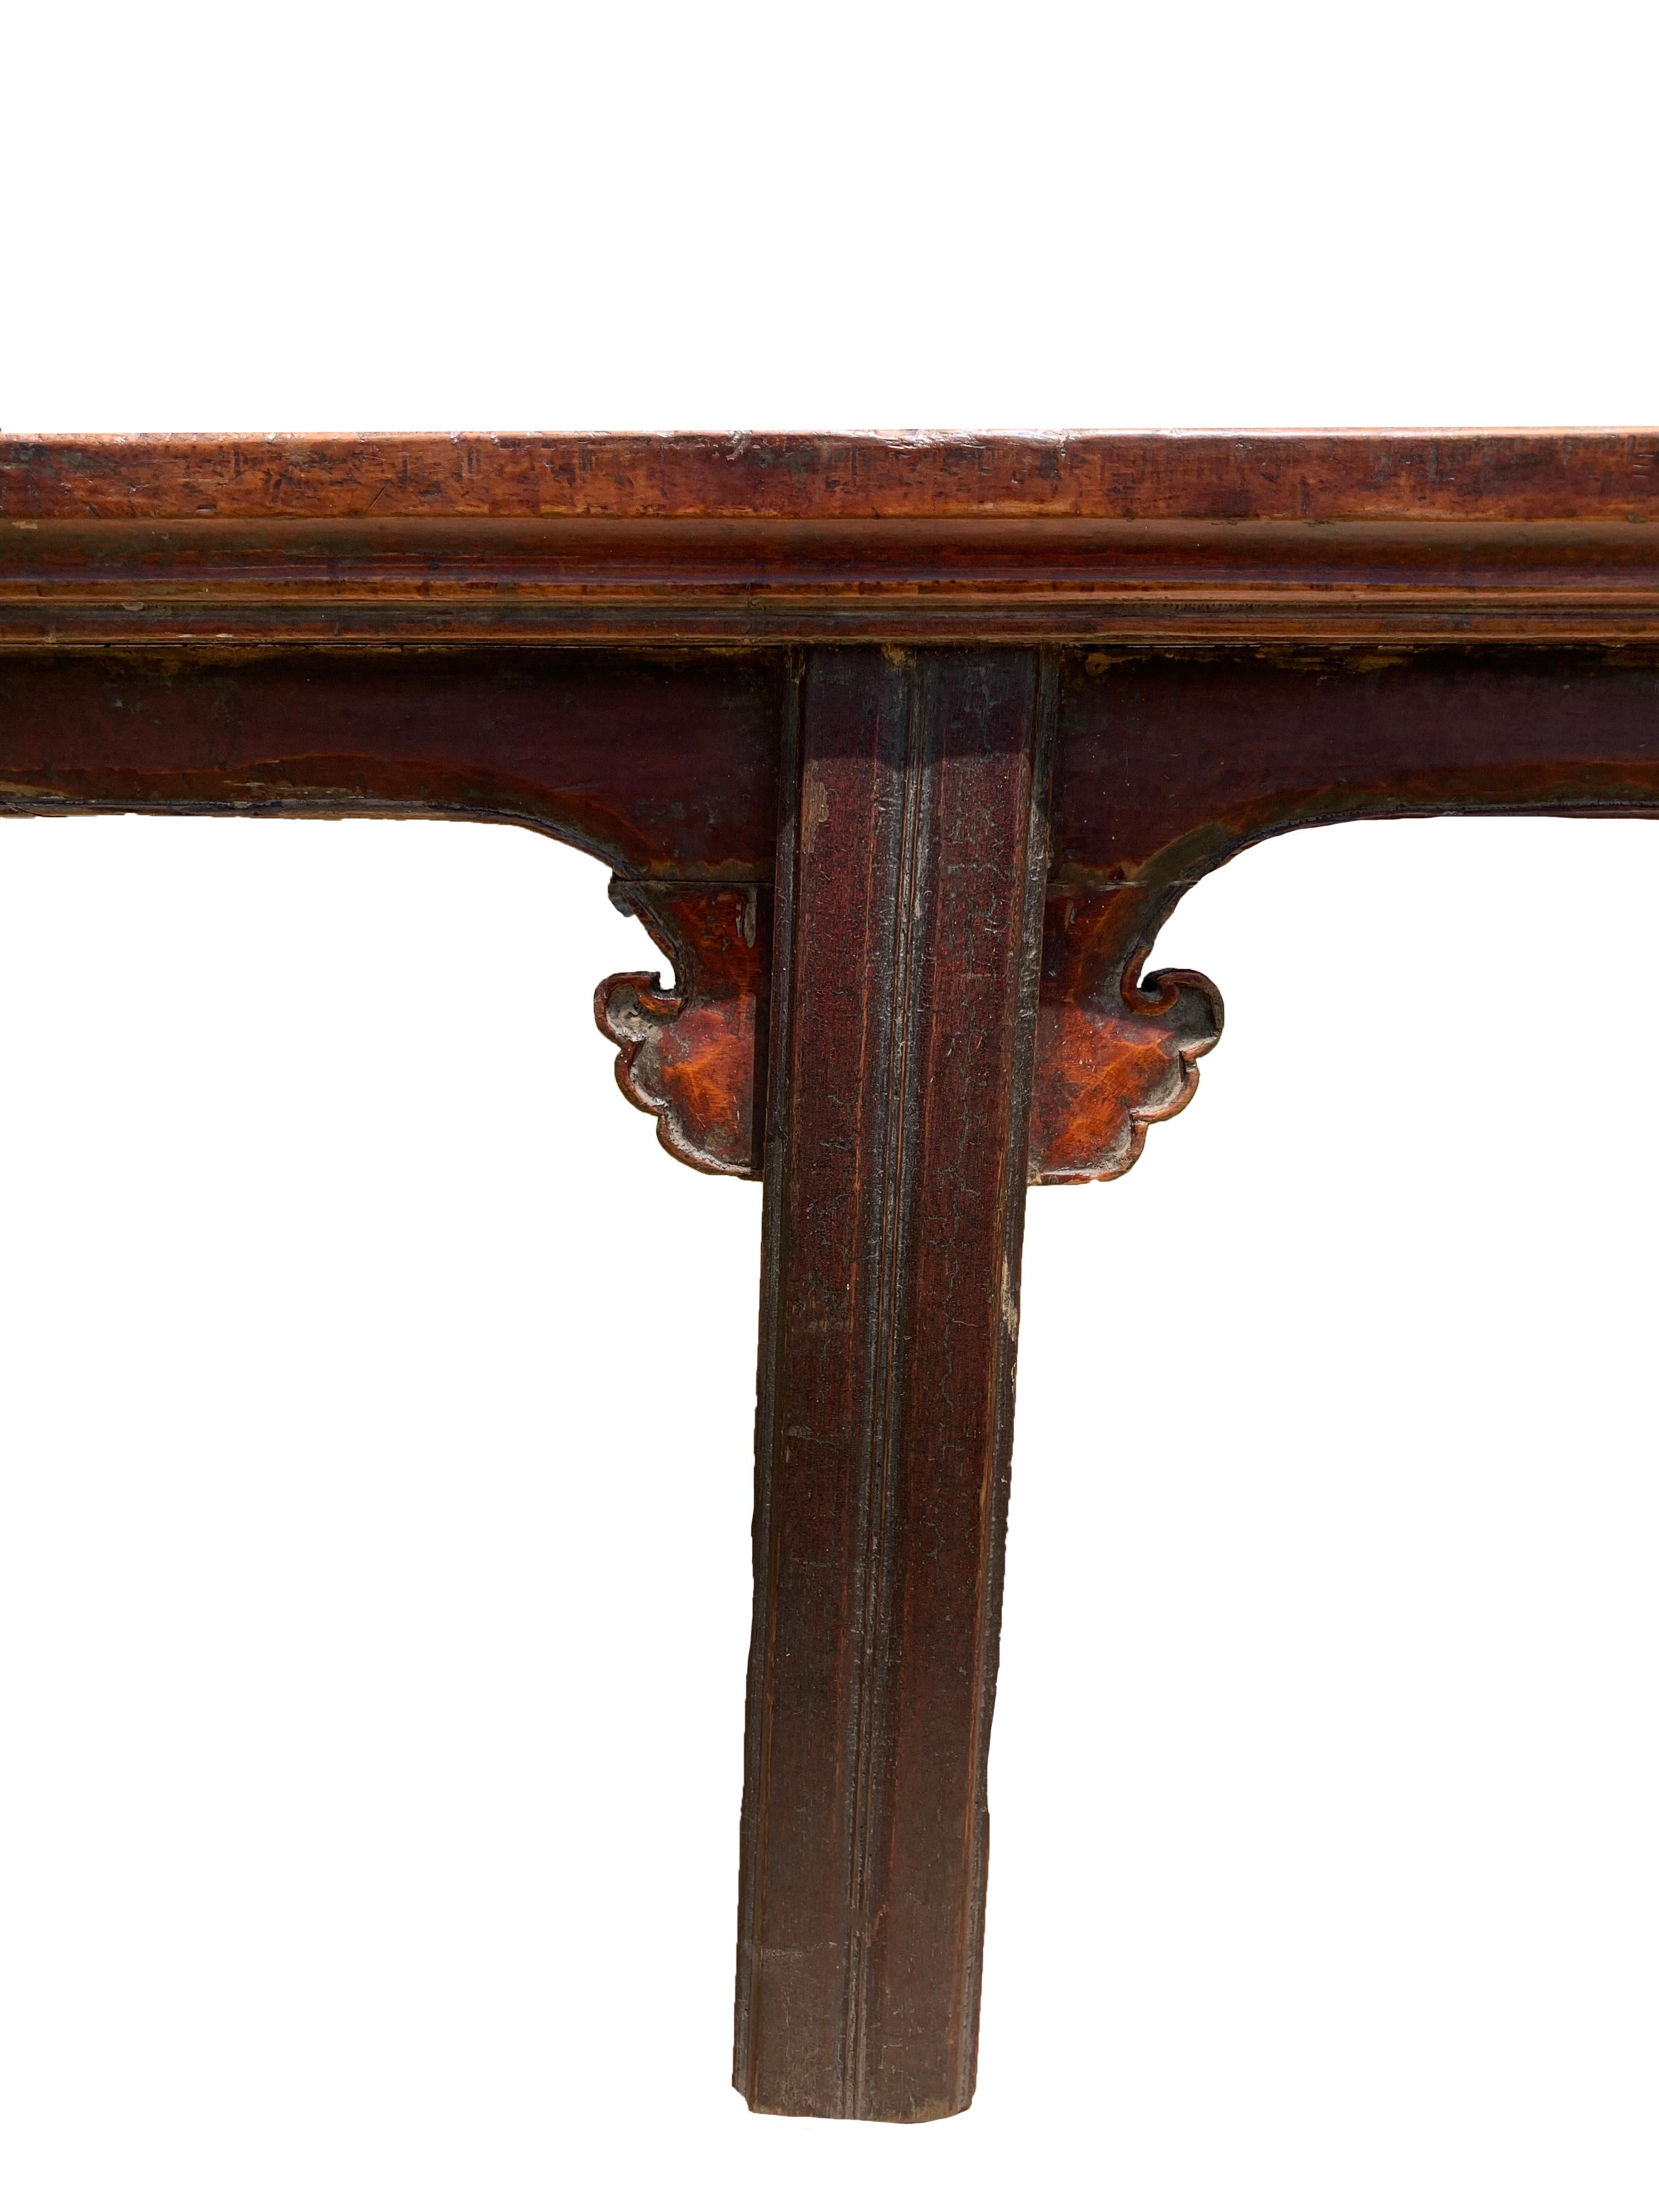 Carved Early 20th Century Chinese Walnut Wood Lacquered Long Bench Shanxi, China